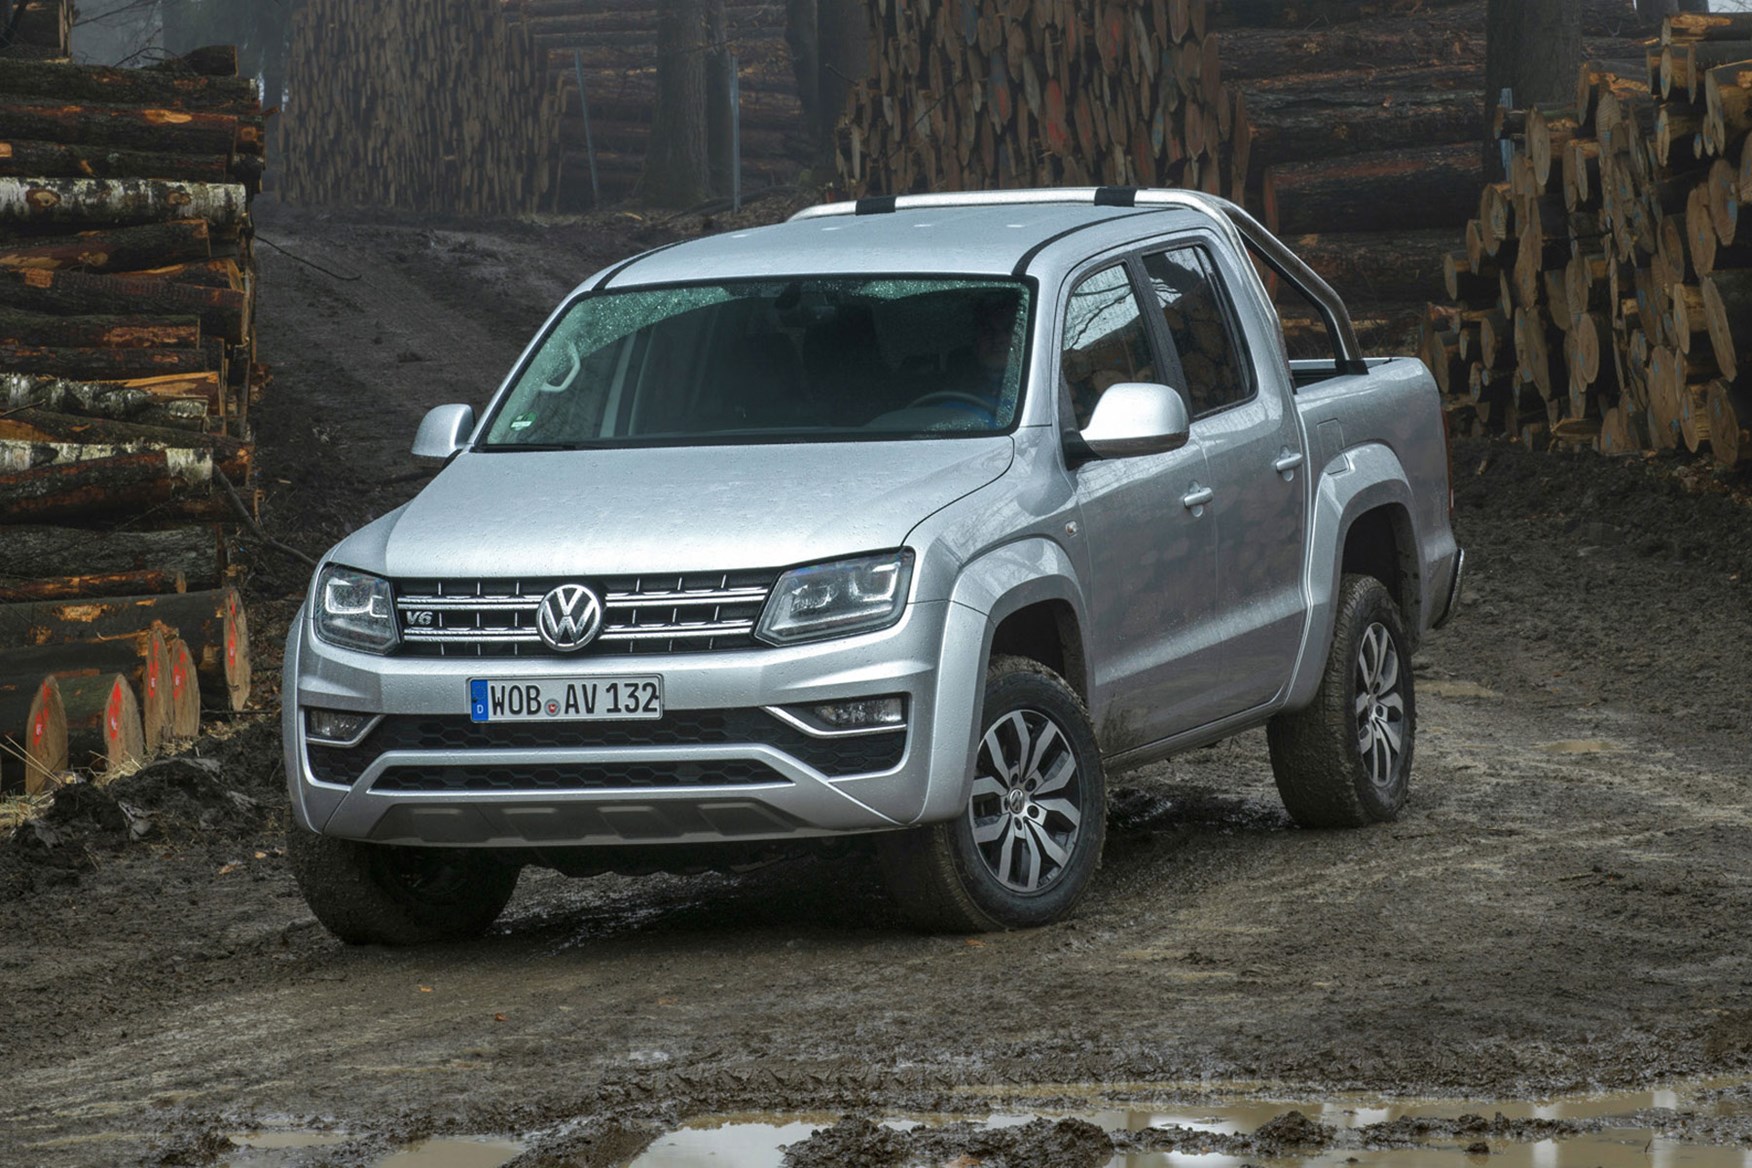 VW Amarok V6 Trendline 204hp review - front-view, off-road, silver